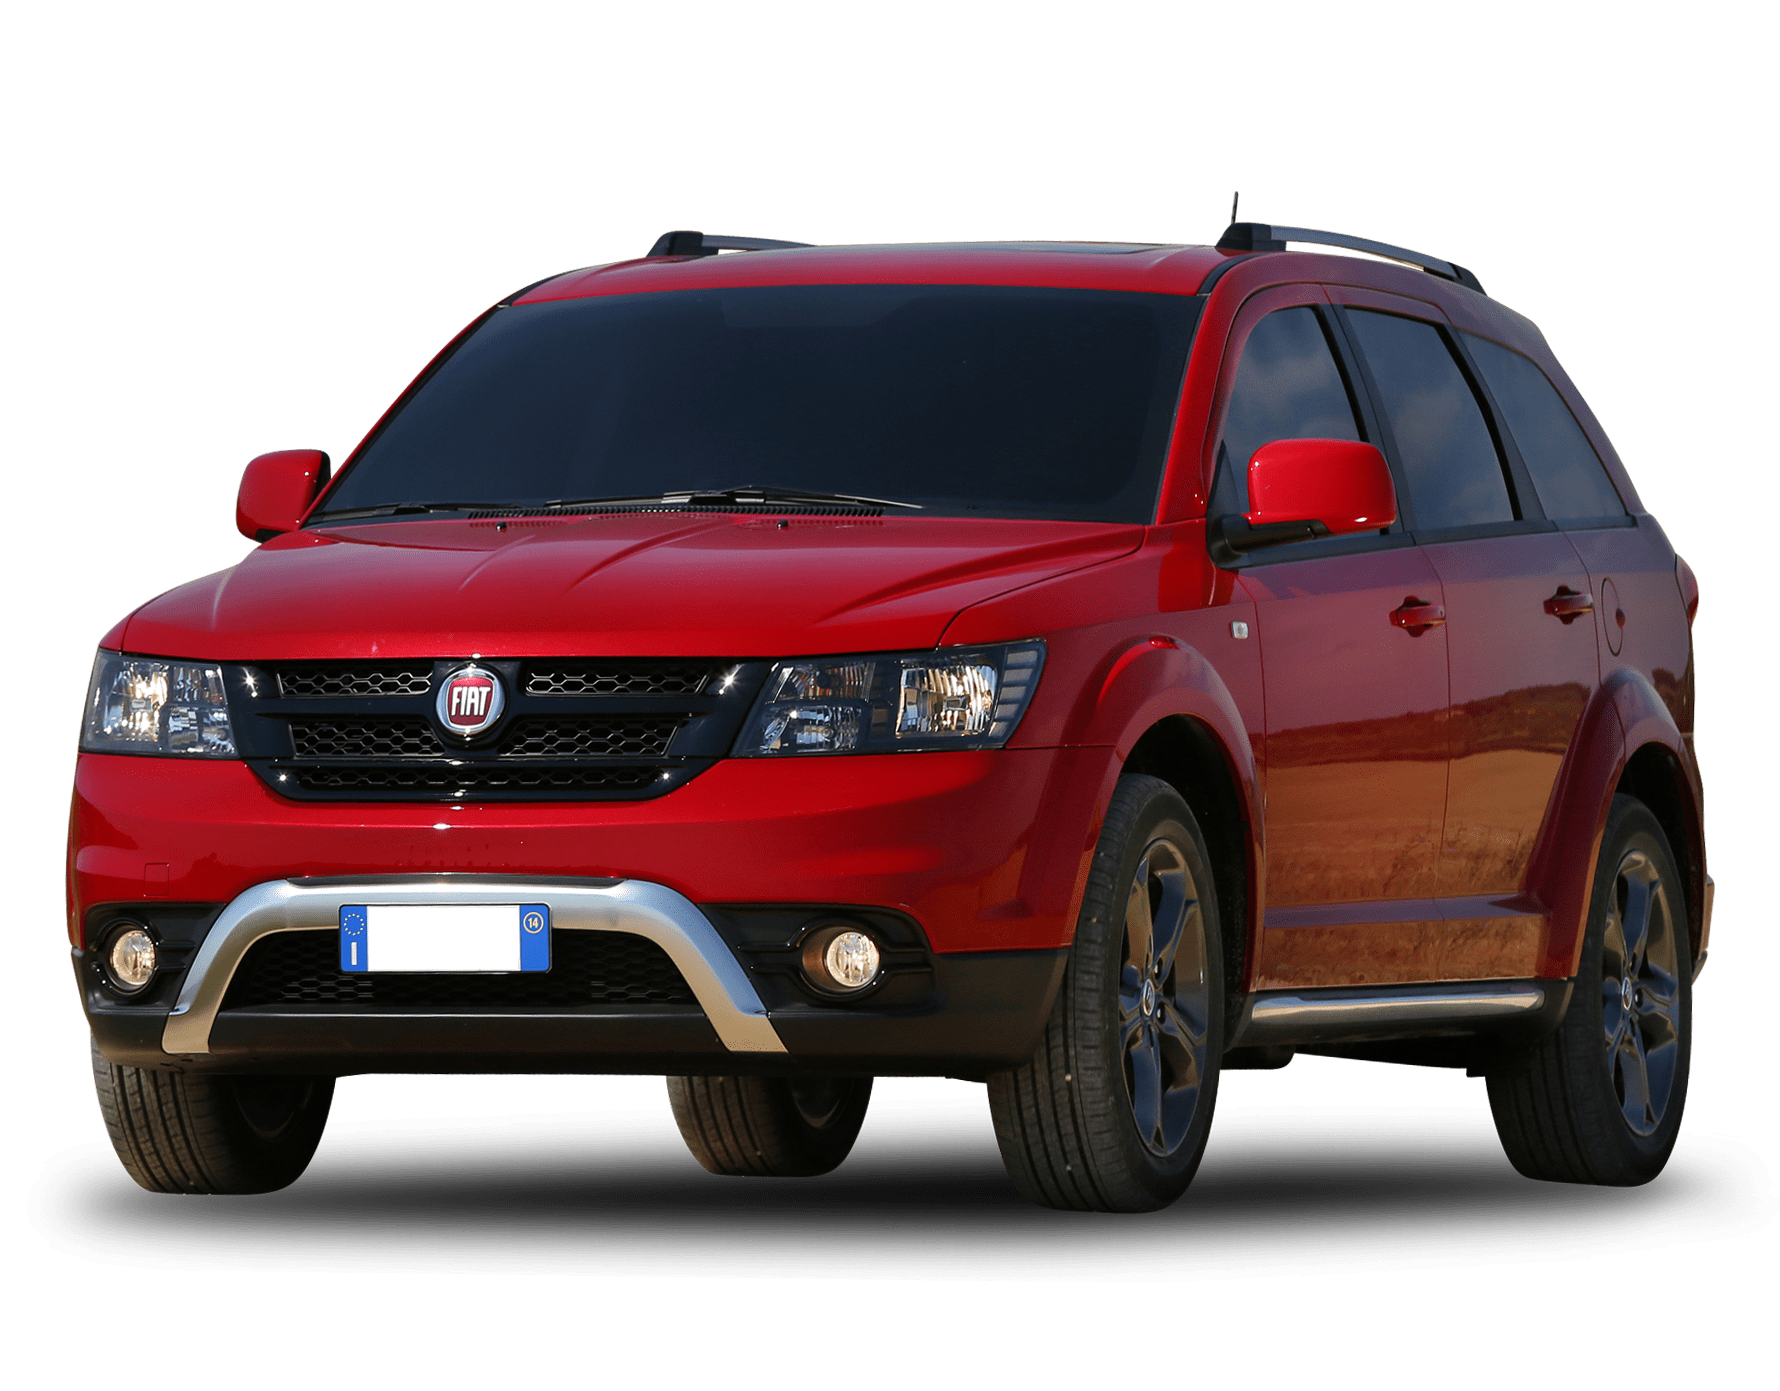 Fiat Freemont Review, For Sale, Interior, Specs & Models in